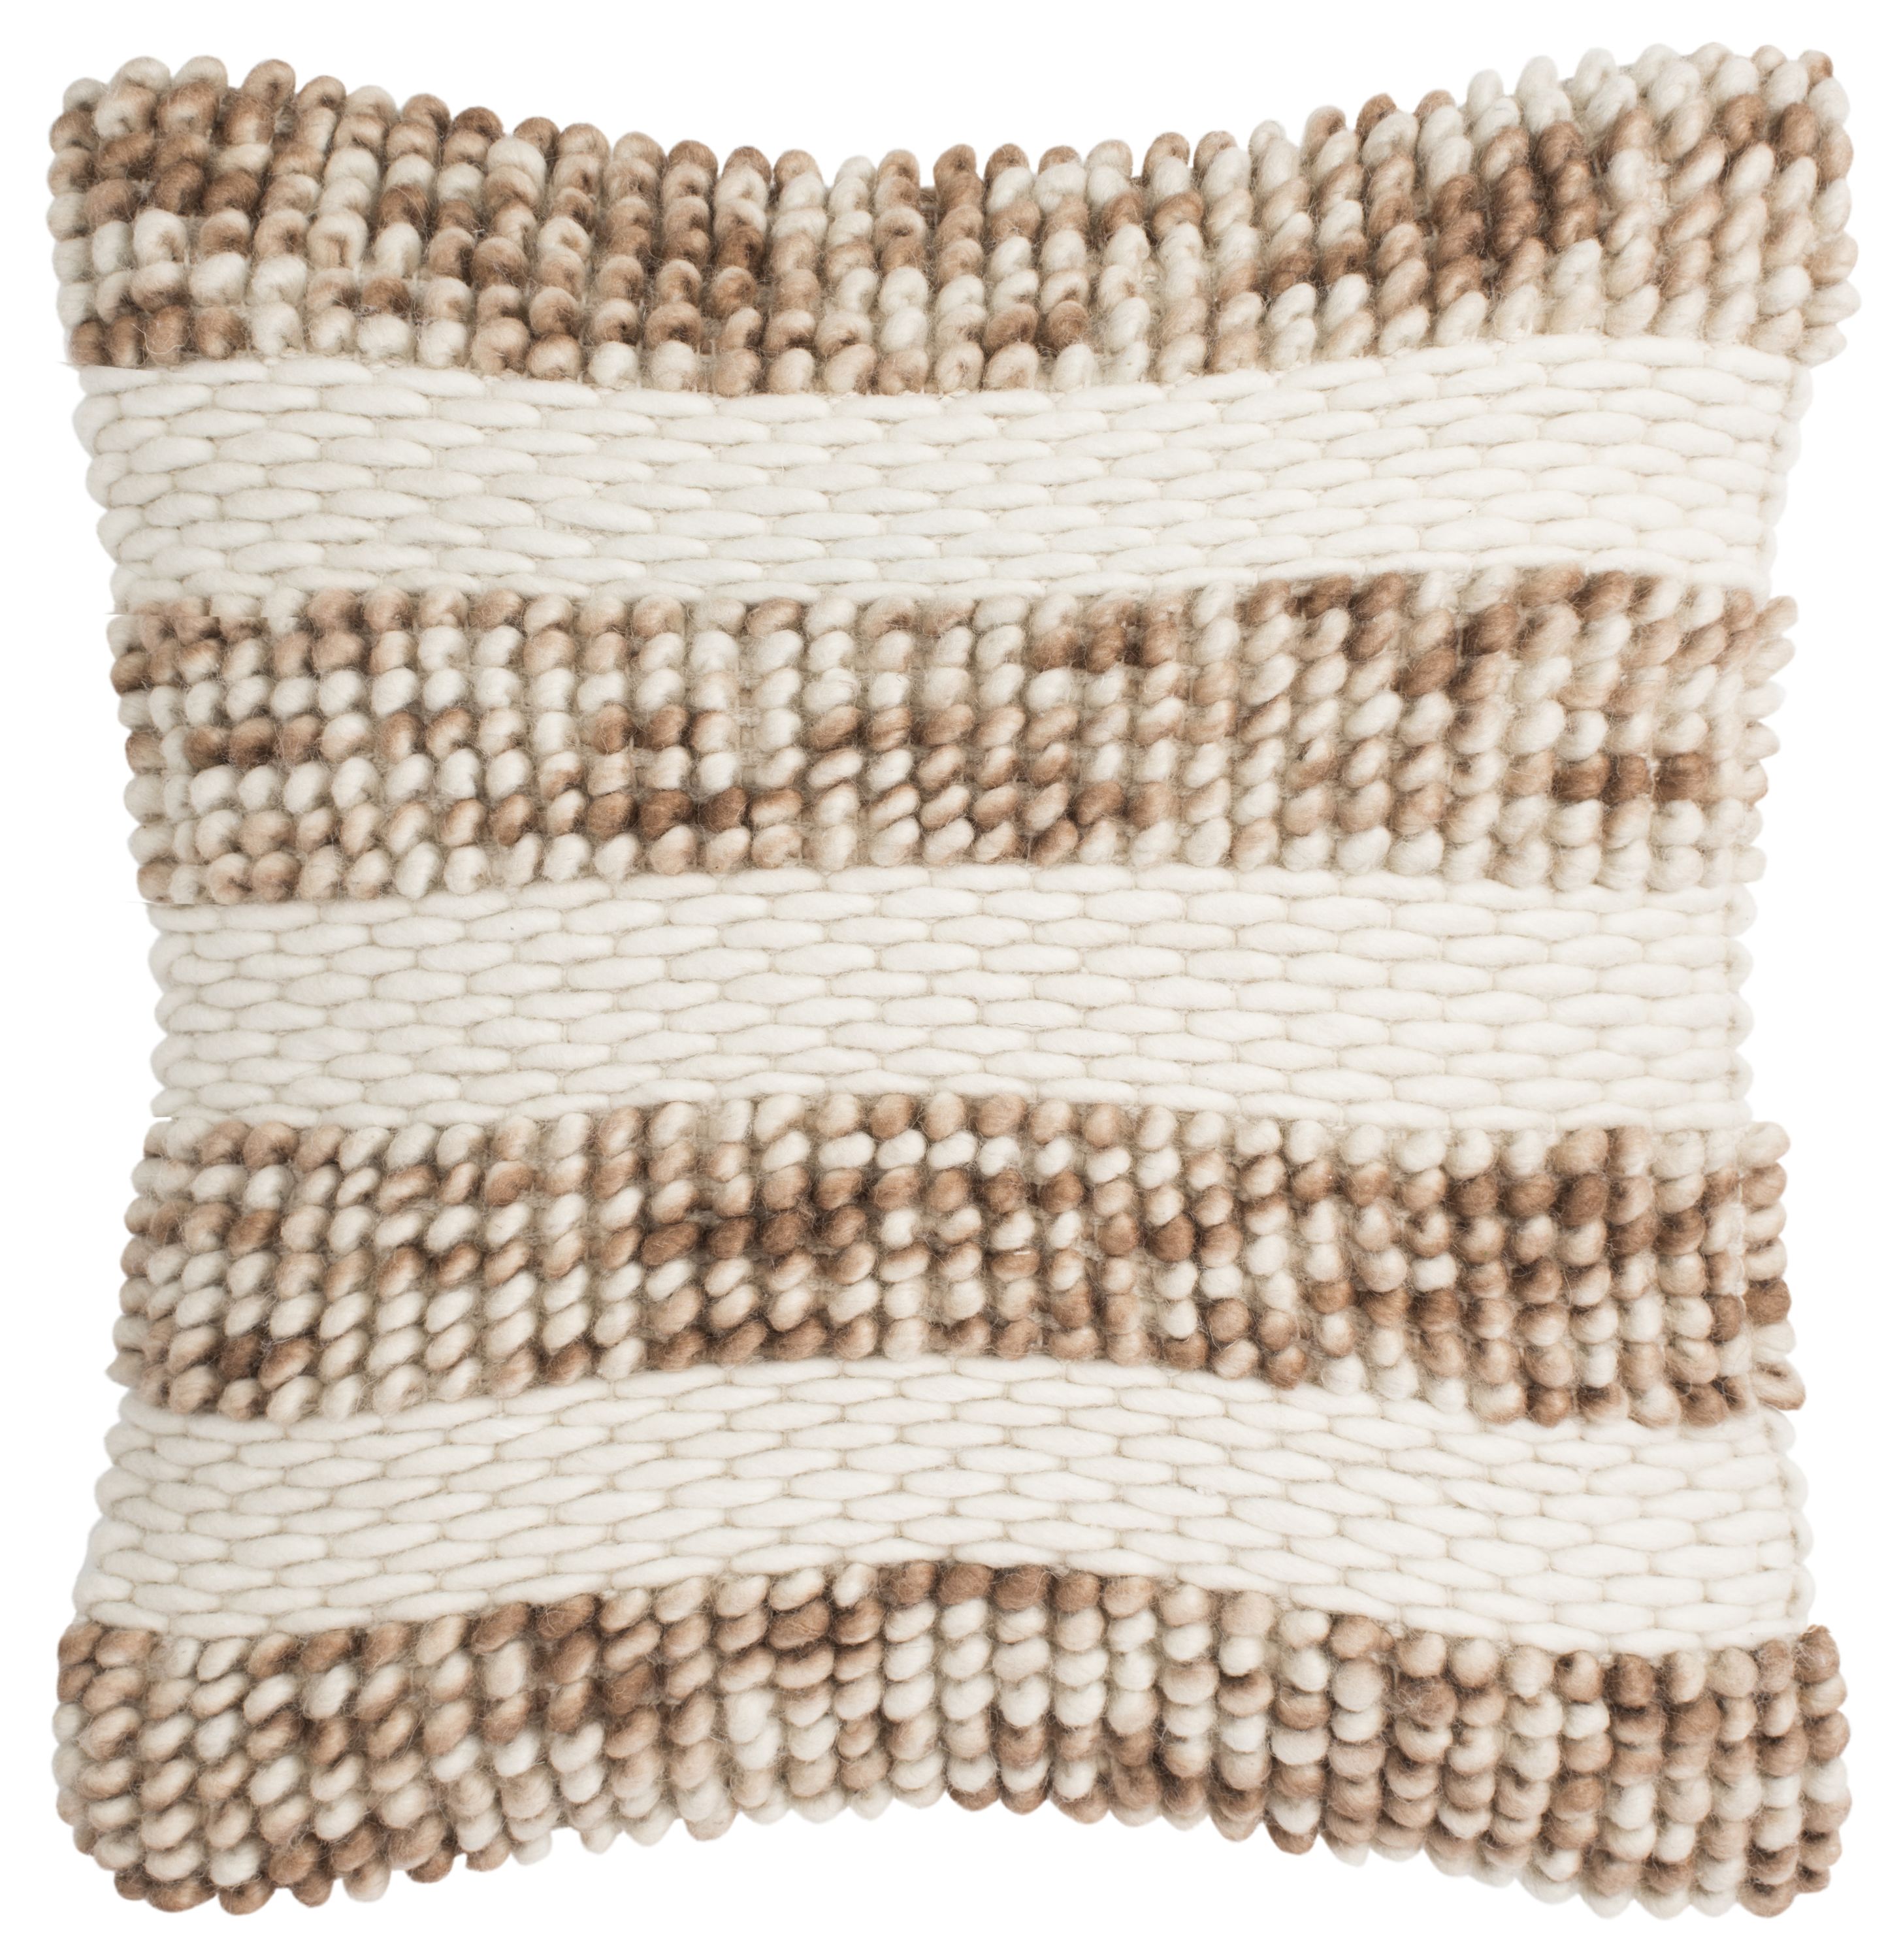 Safavieh Loop and Weaved Striped 20-in x 20-in Eggshell Blend Handloom Wool Indoor Decorative Pillow Cotton in Brown | PLS111A-2020